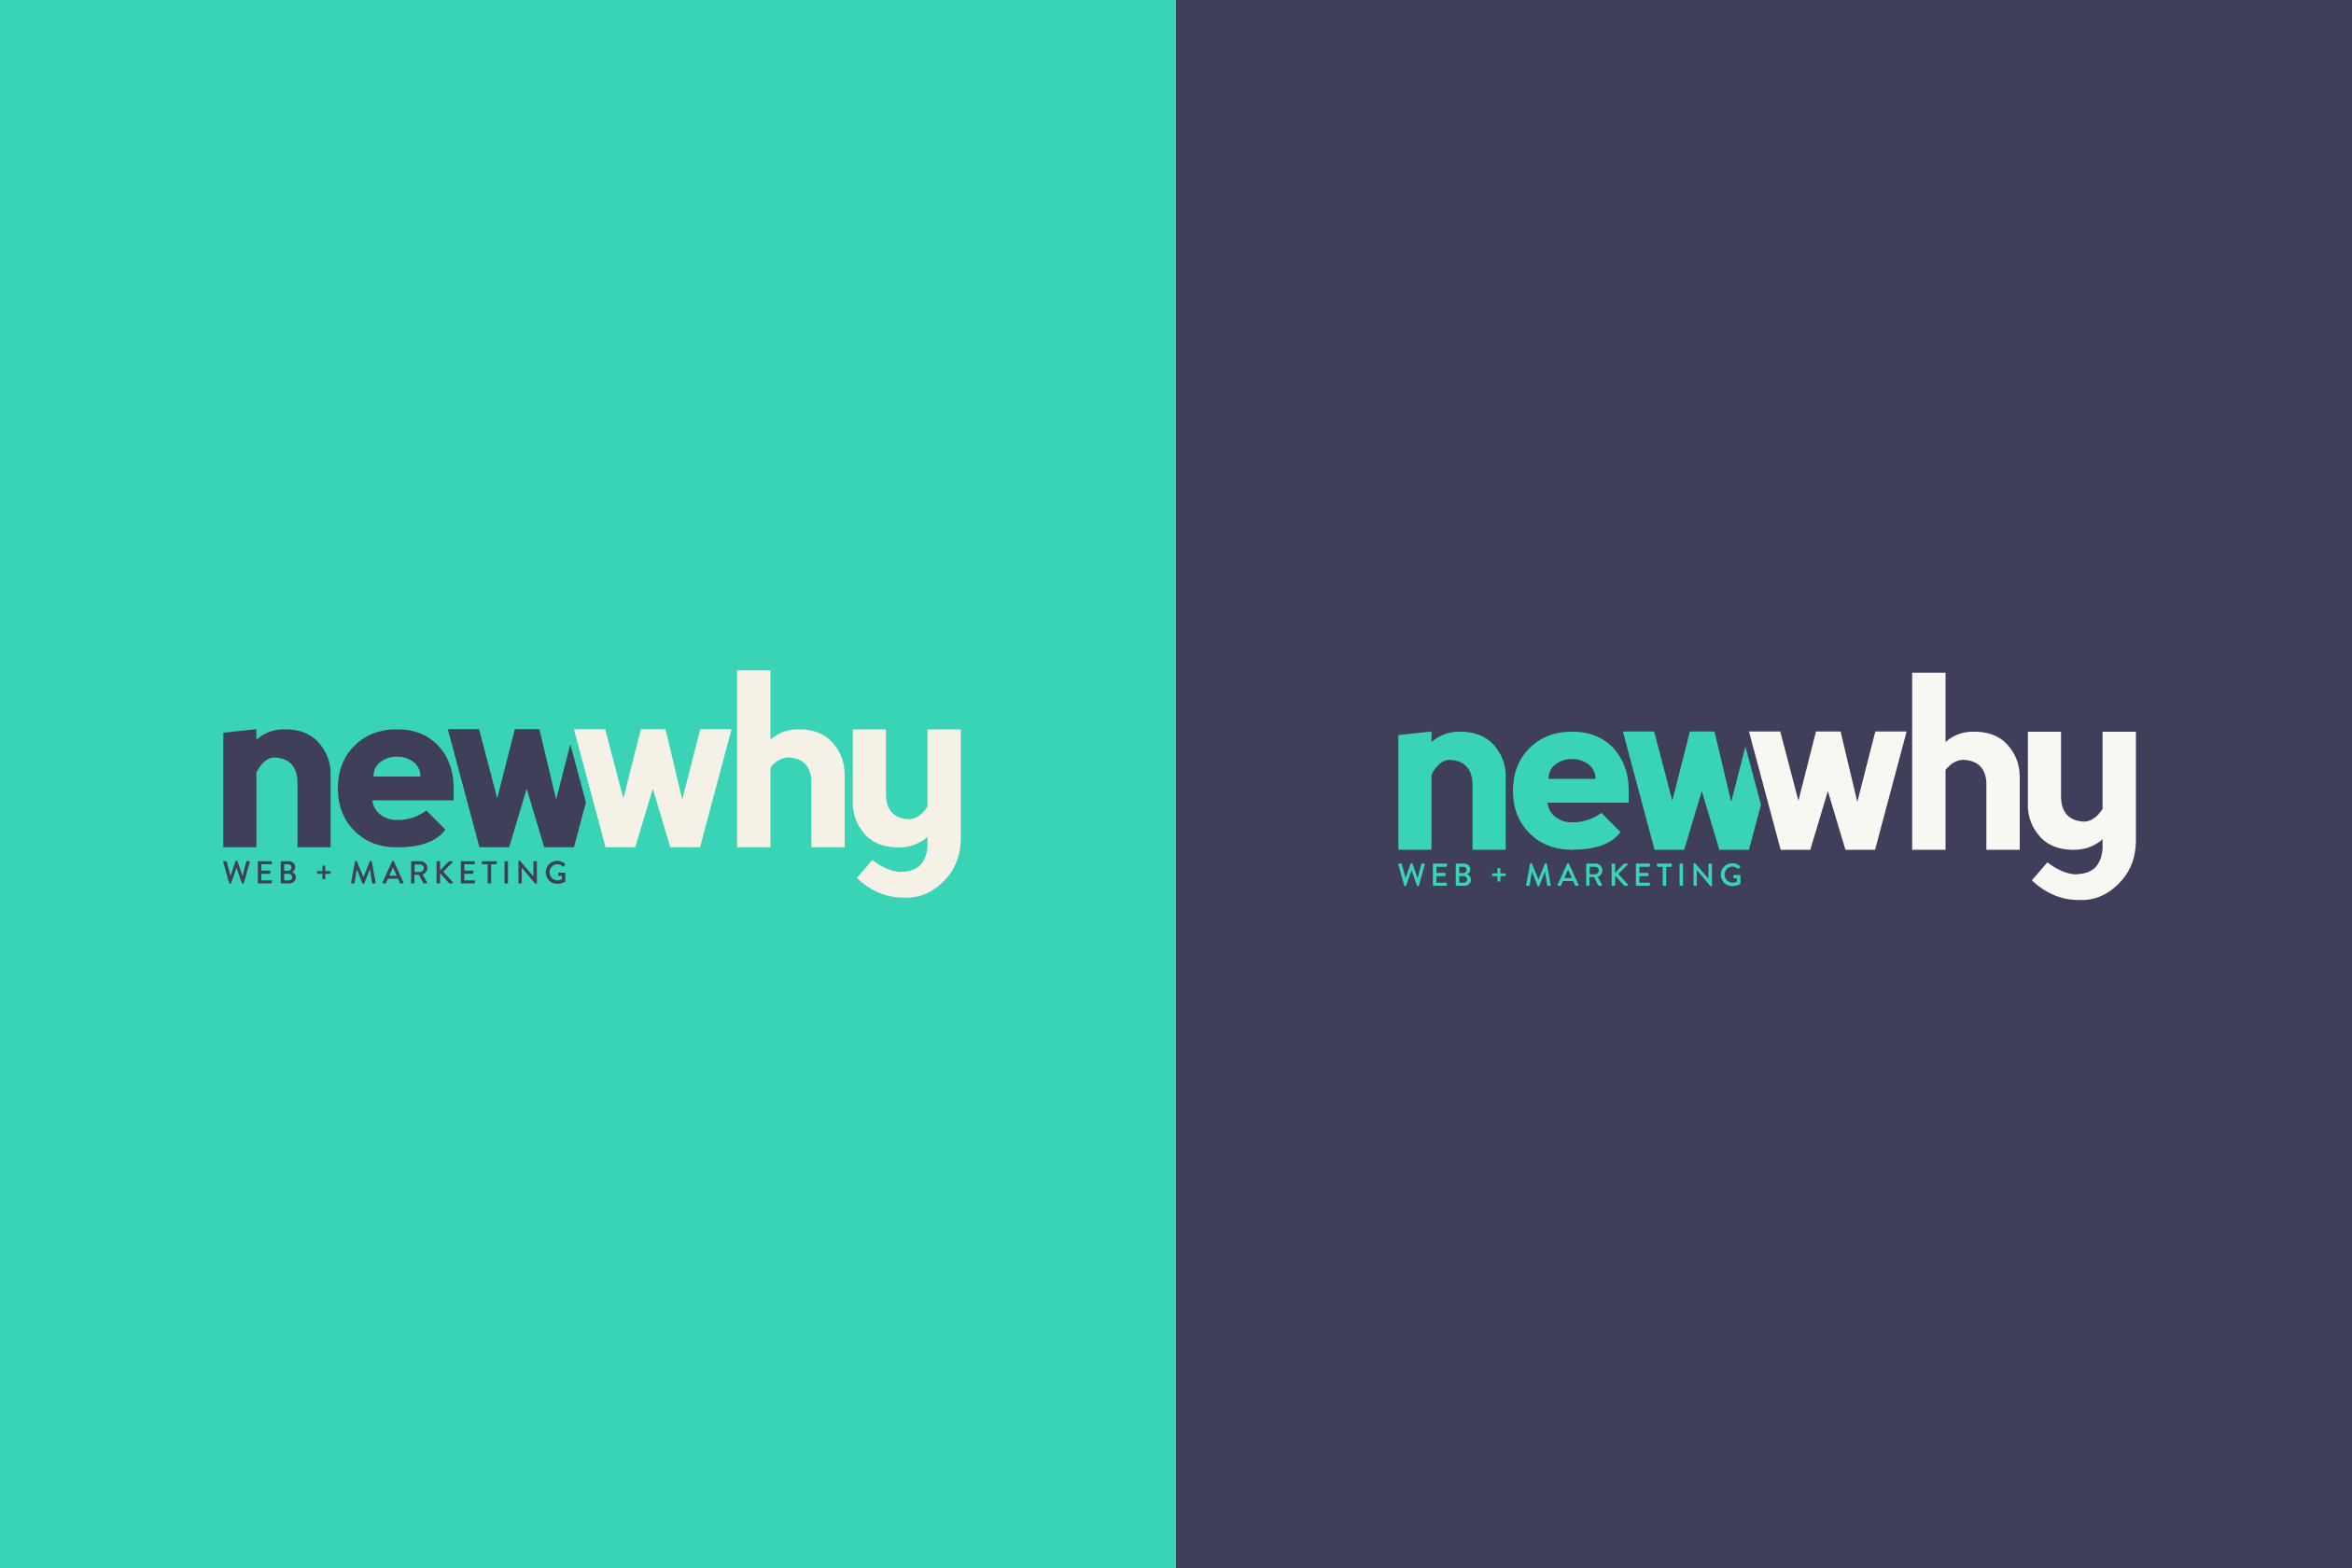 Why Logo - New Why